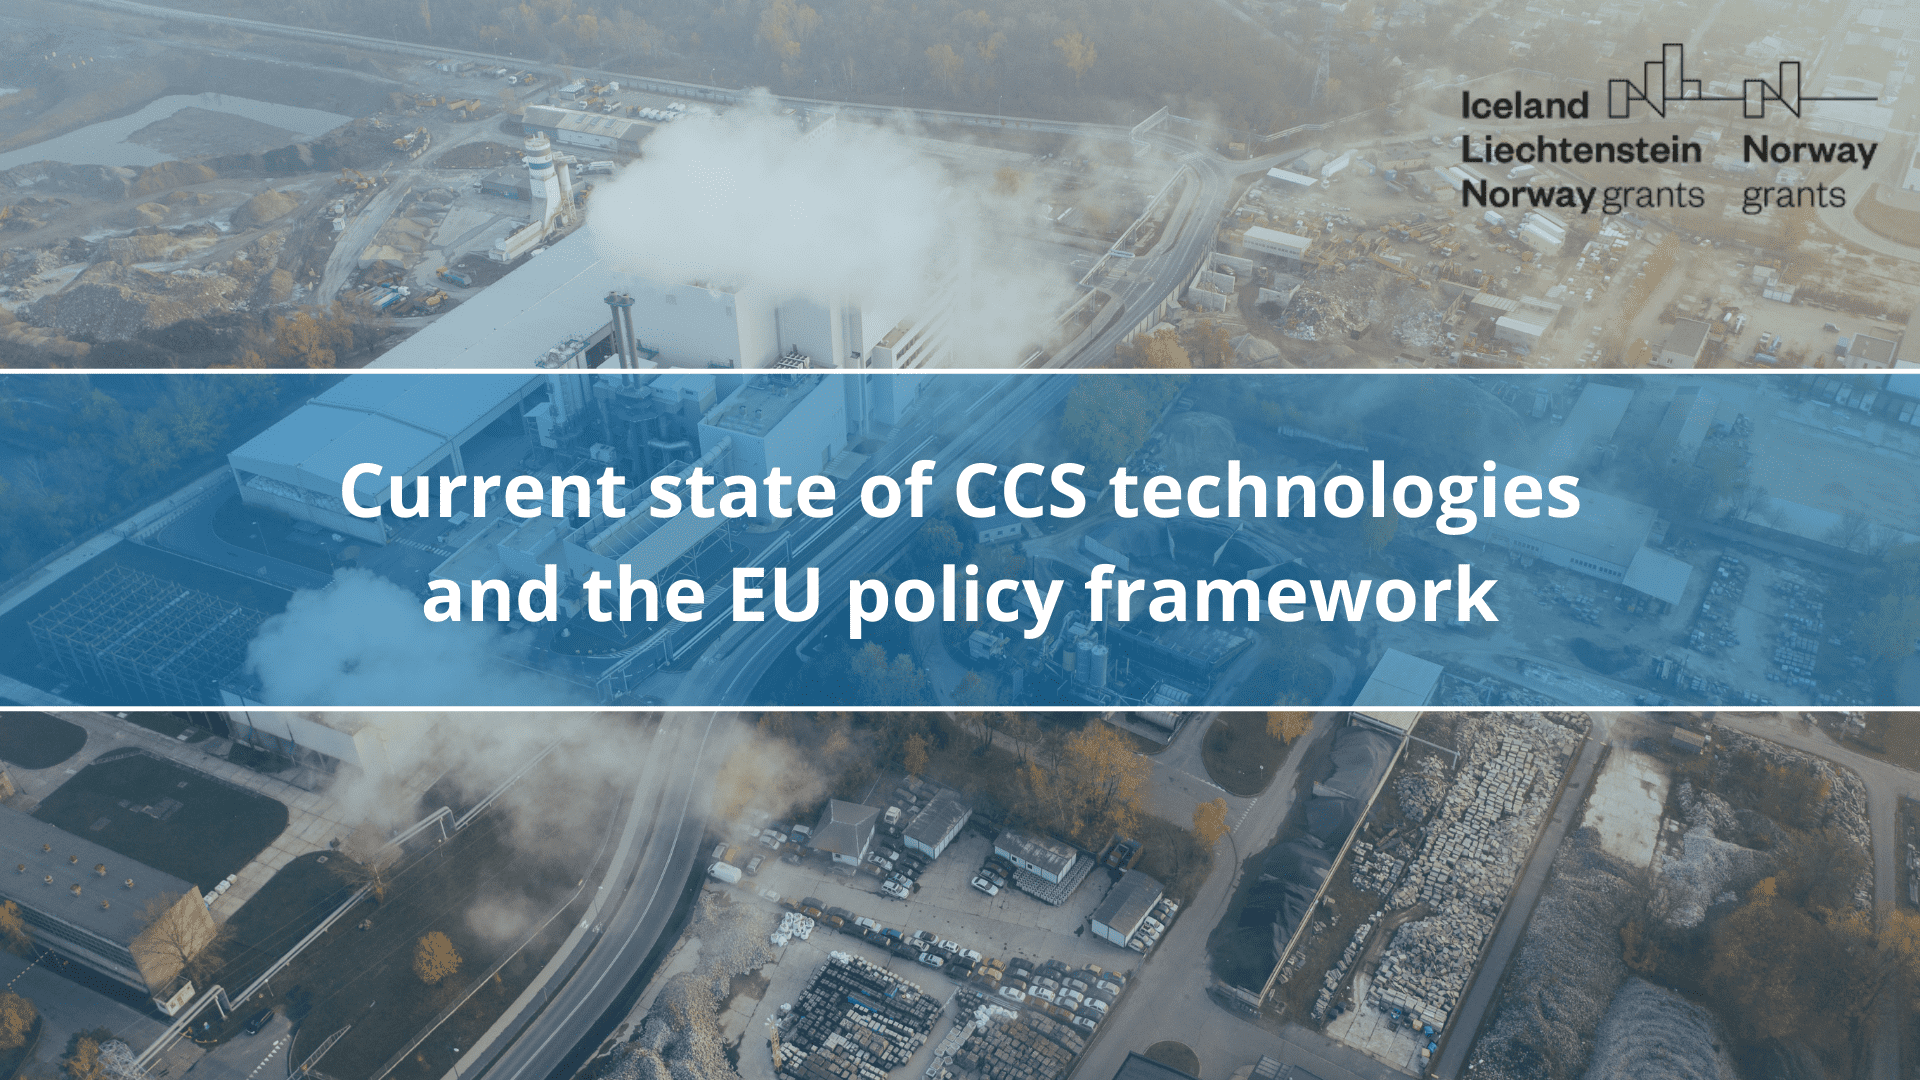 Current state of CCS technologies and the EU policy framework